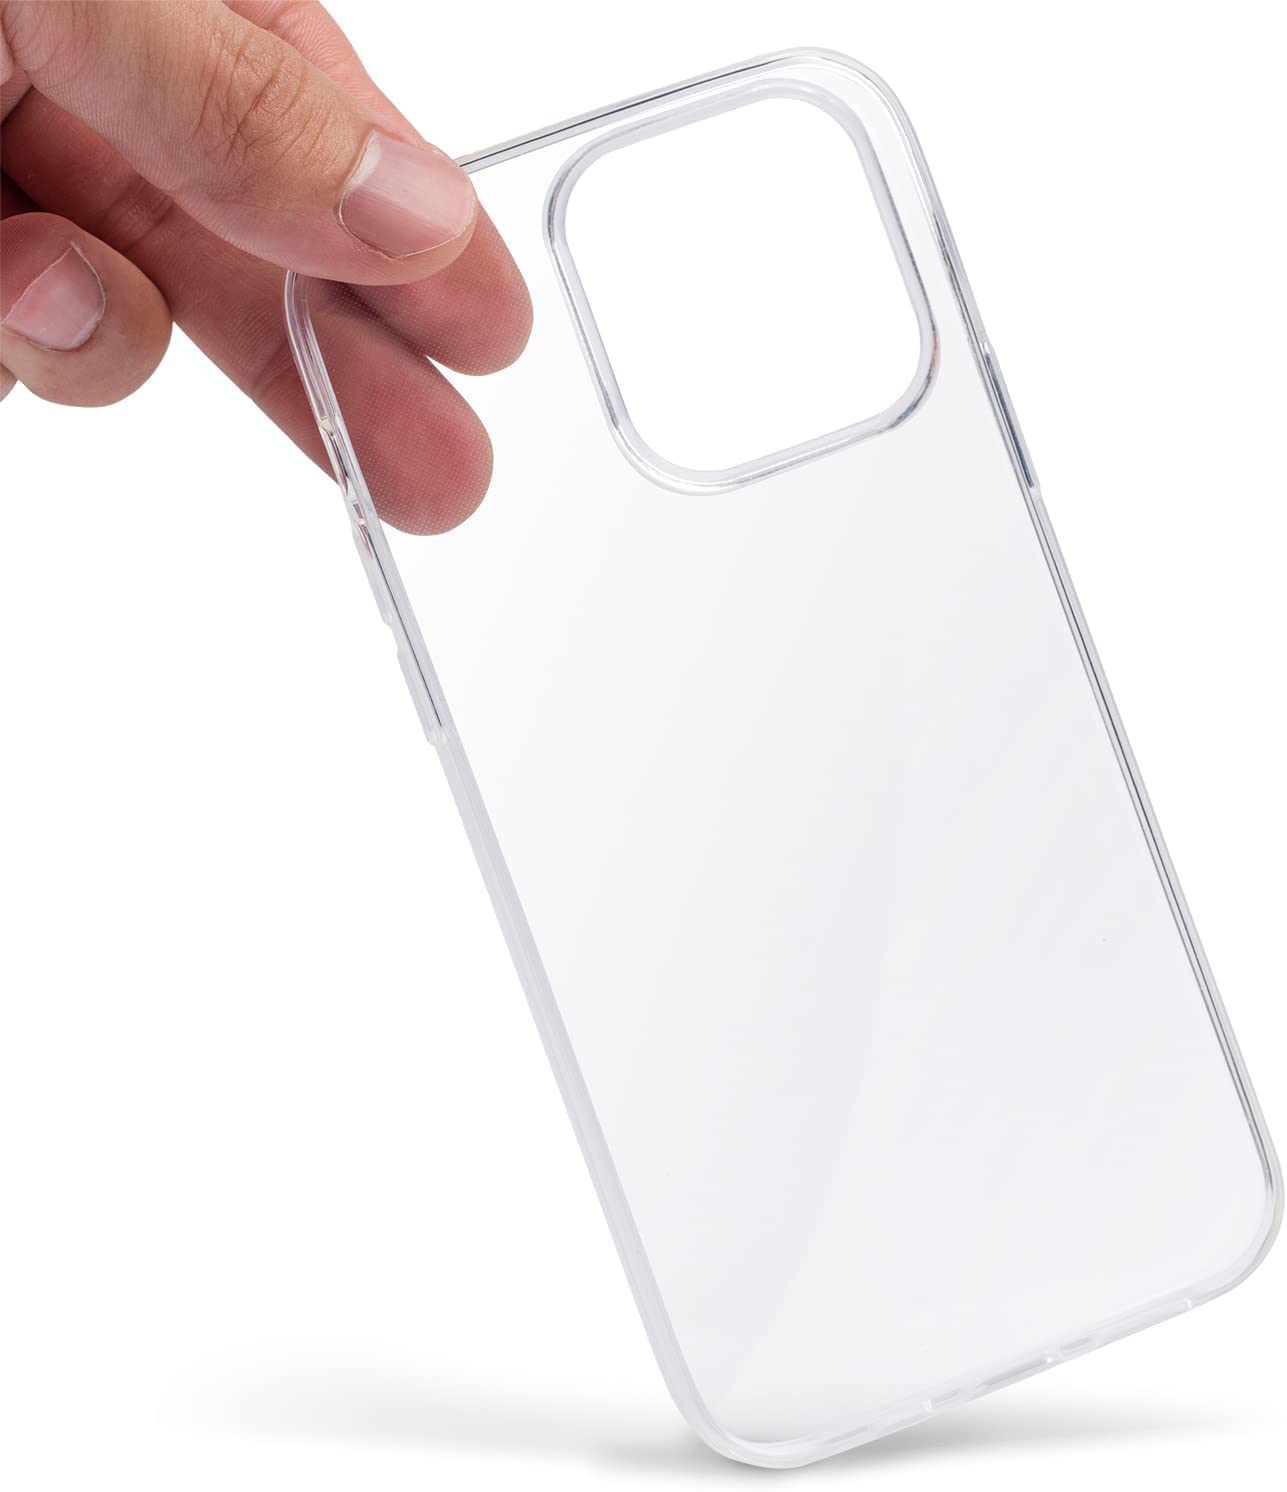 totallee Clear iPhone 14 Pro Max Case, Thin Cover Ultra Slim Minimal - for Apple iPhone 14 Pro Max (2022) (Transparent) - image 5 of 7